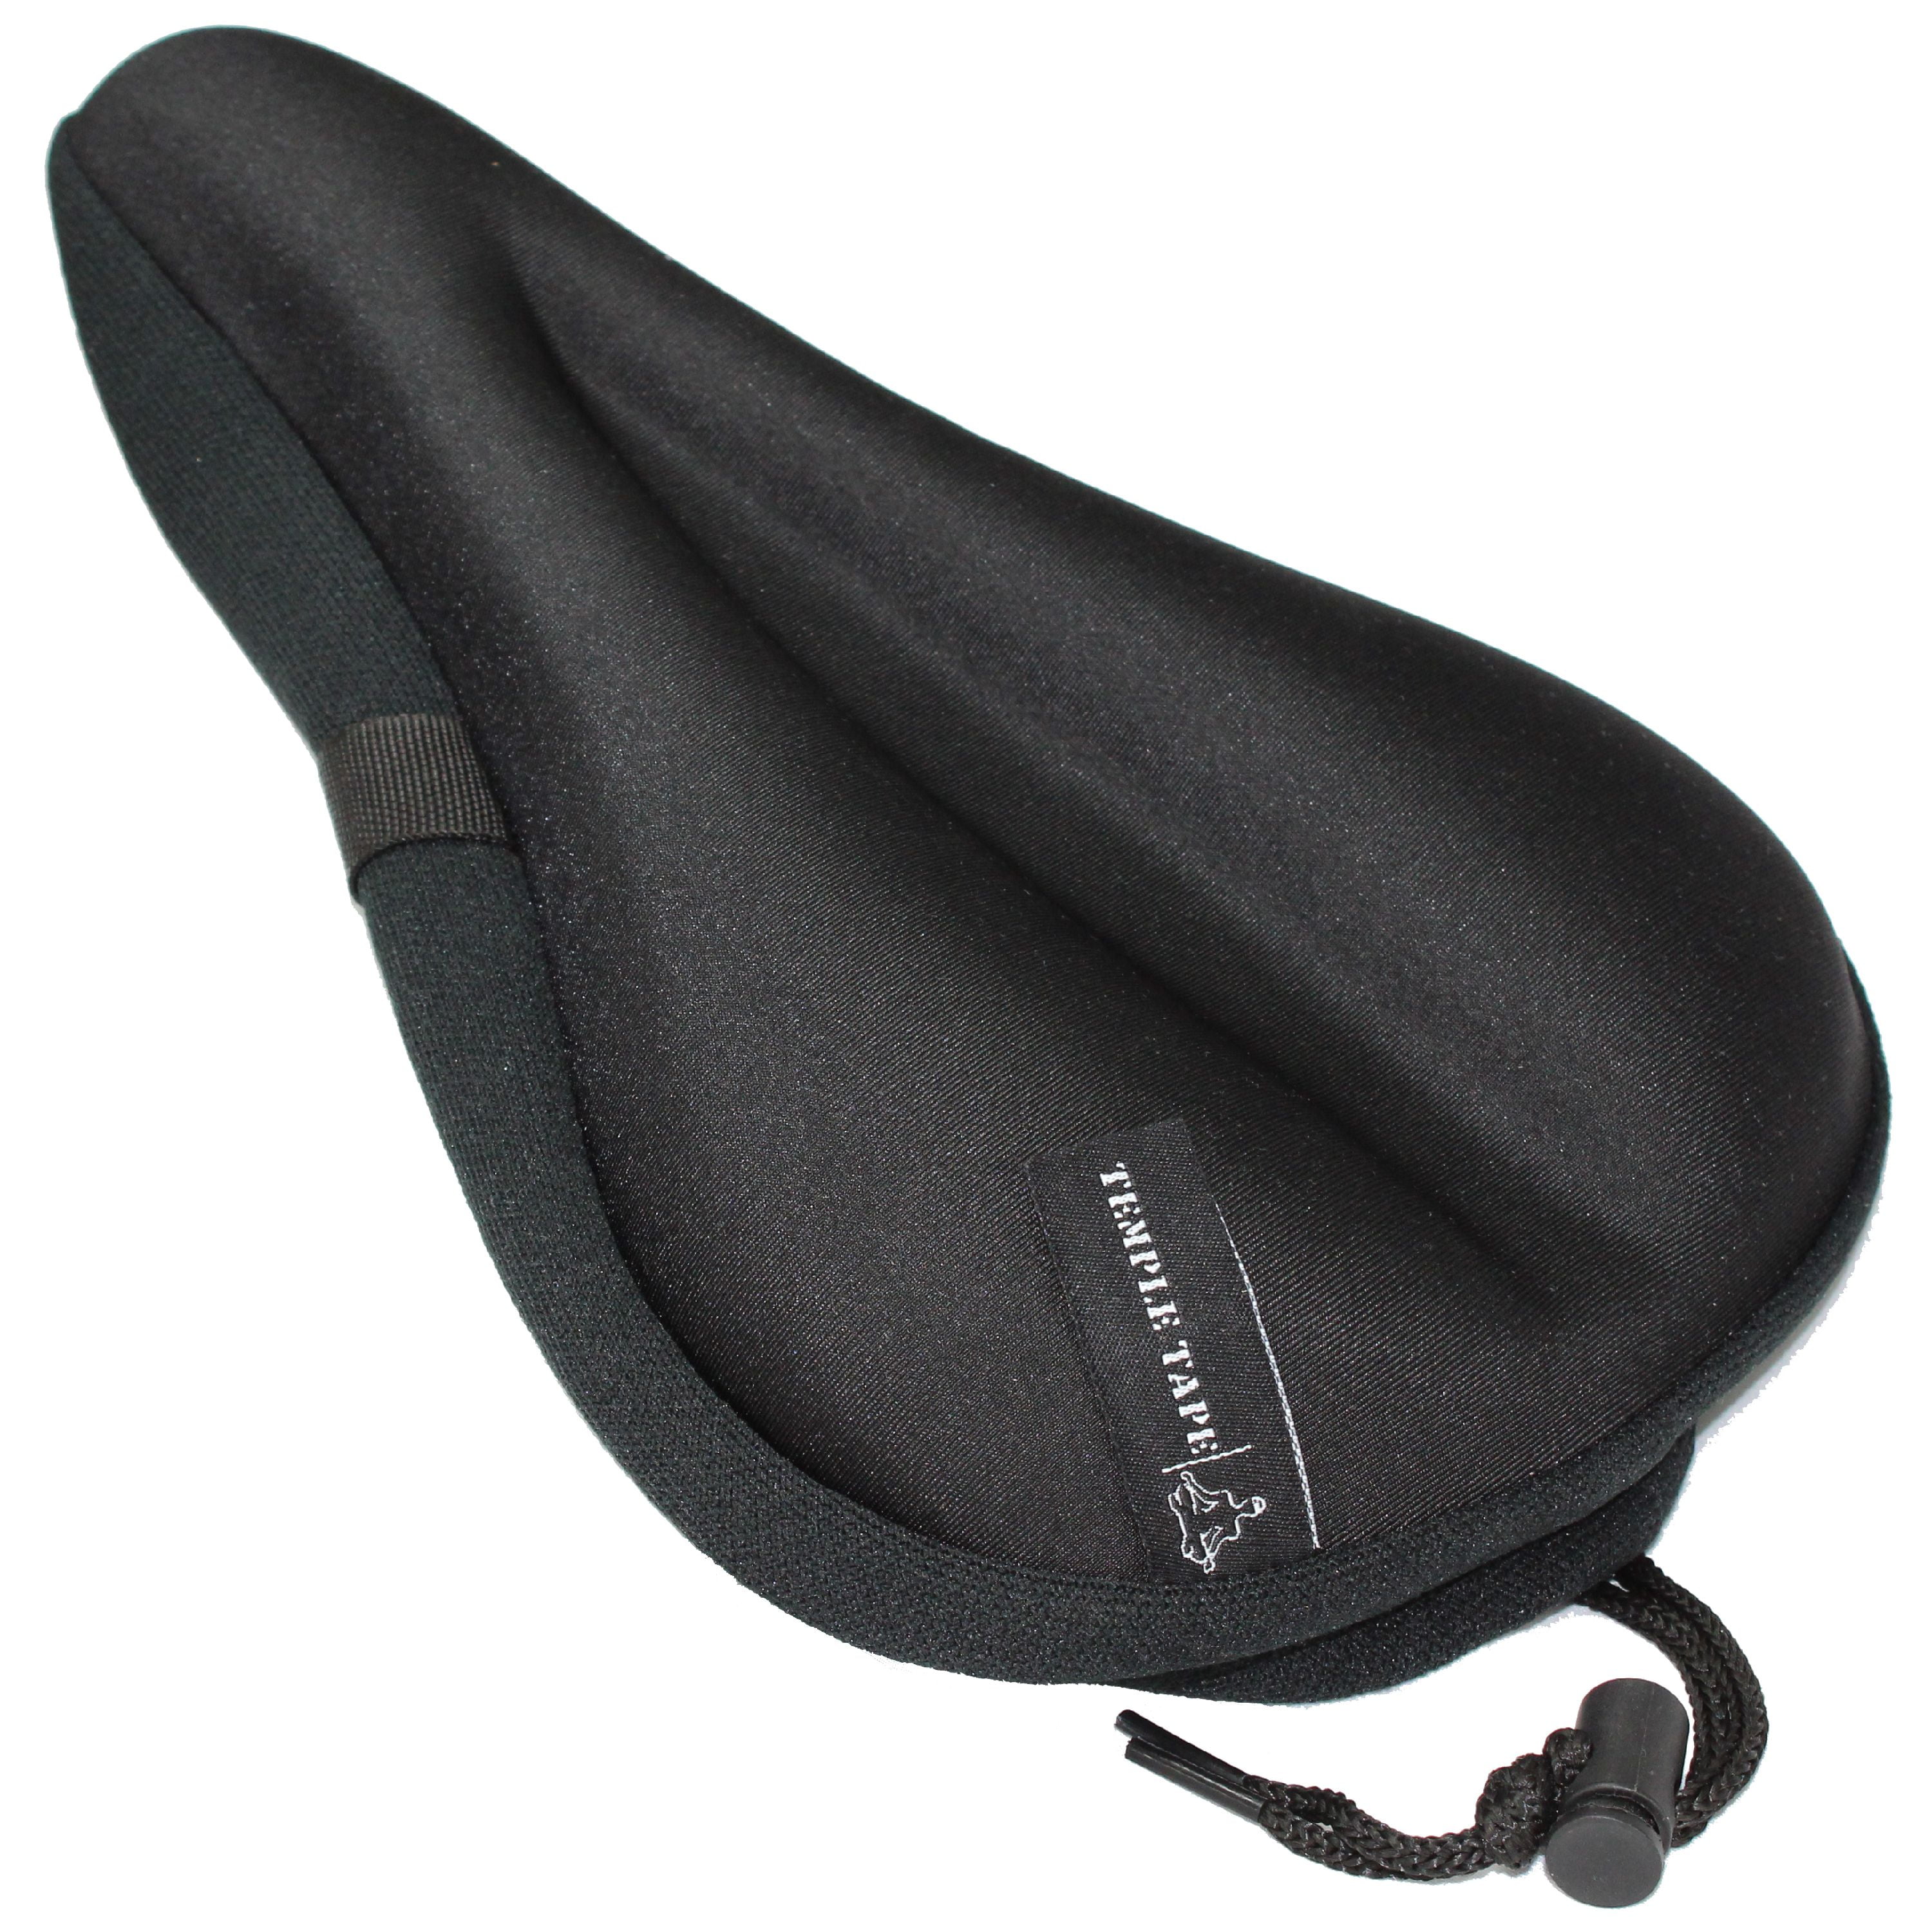 Via Velo Memory Foam Bike Seat Cover For Mens Womens Outdoor/Indoor Cycling 